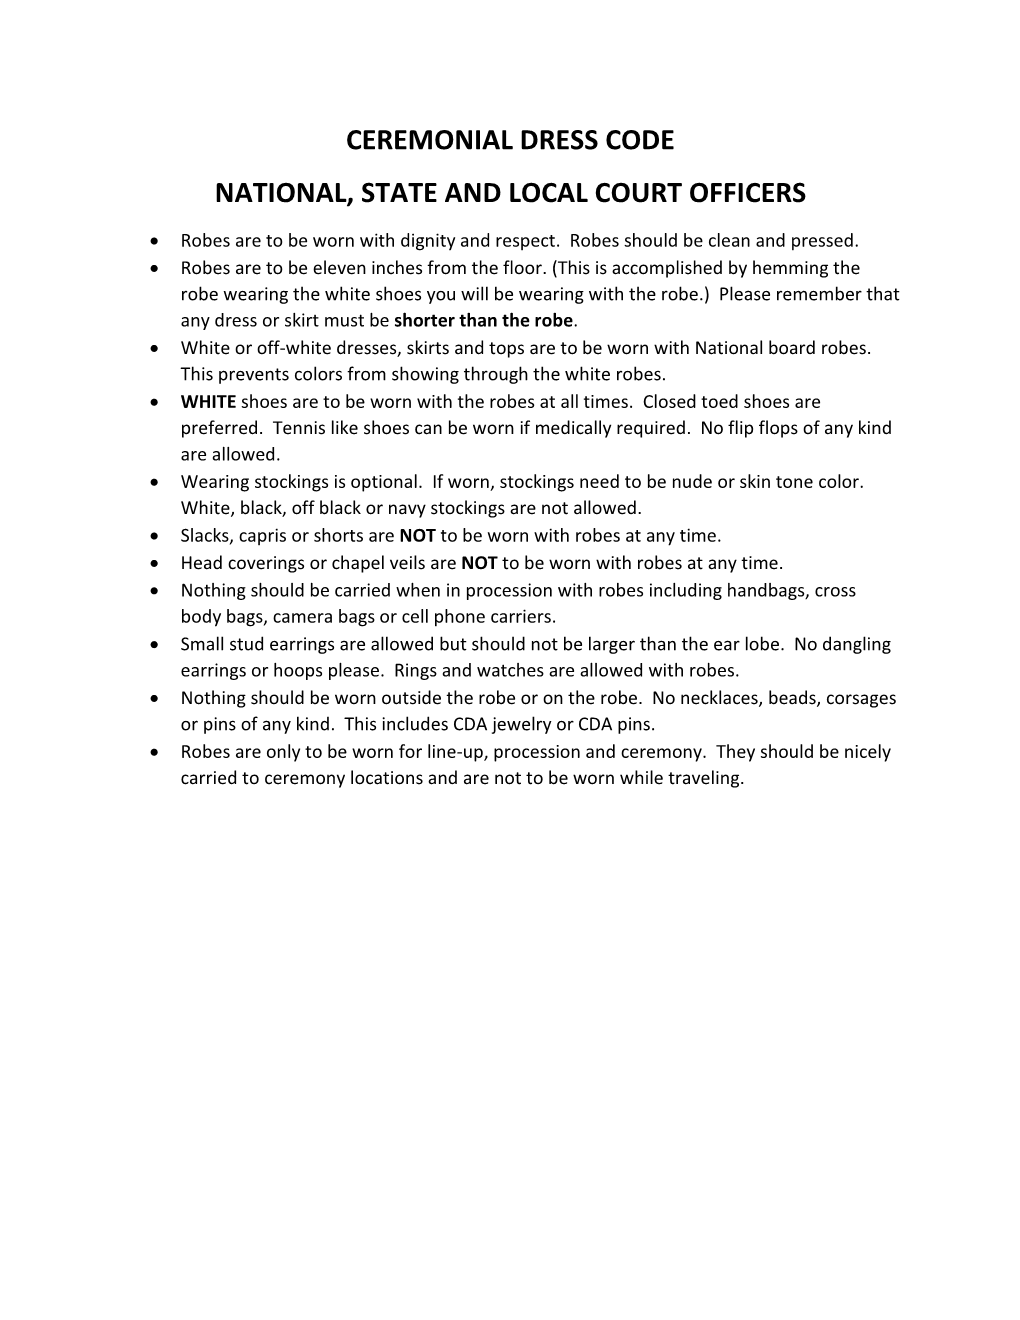 Ceremonial Dress Code National, State and Local Court Officers